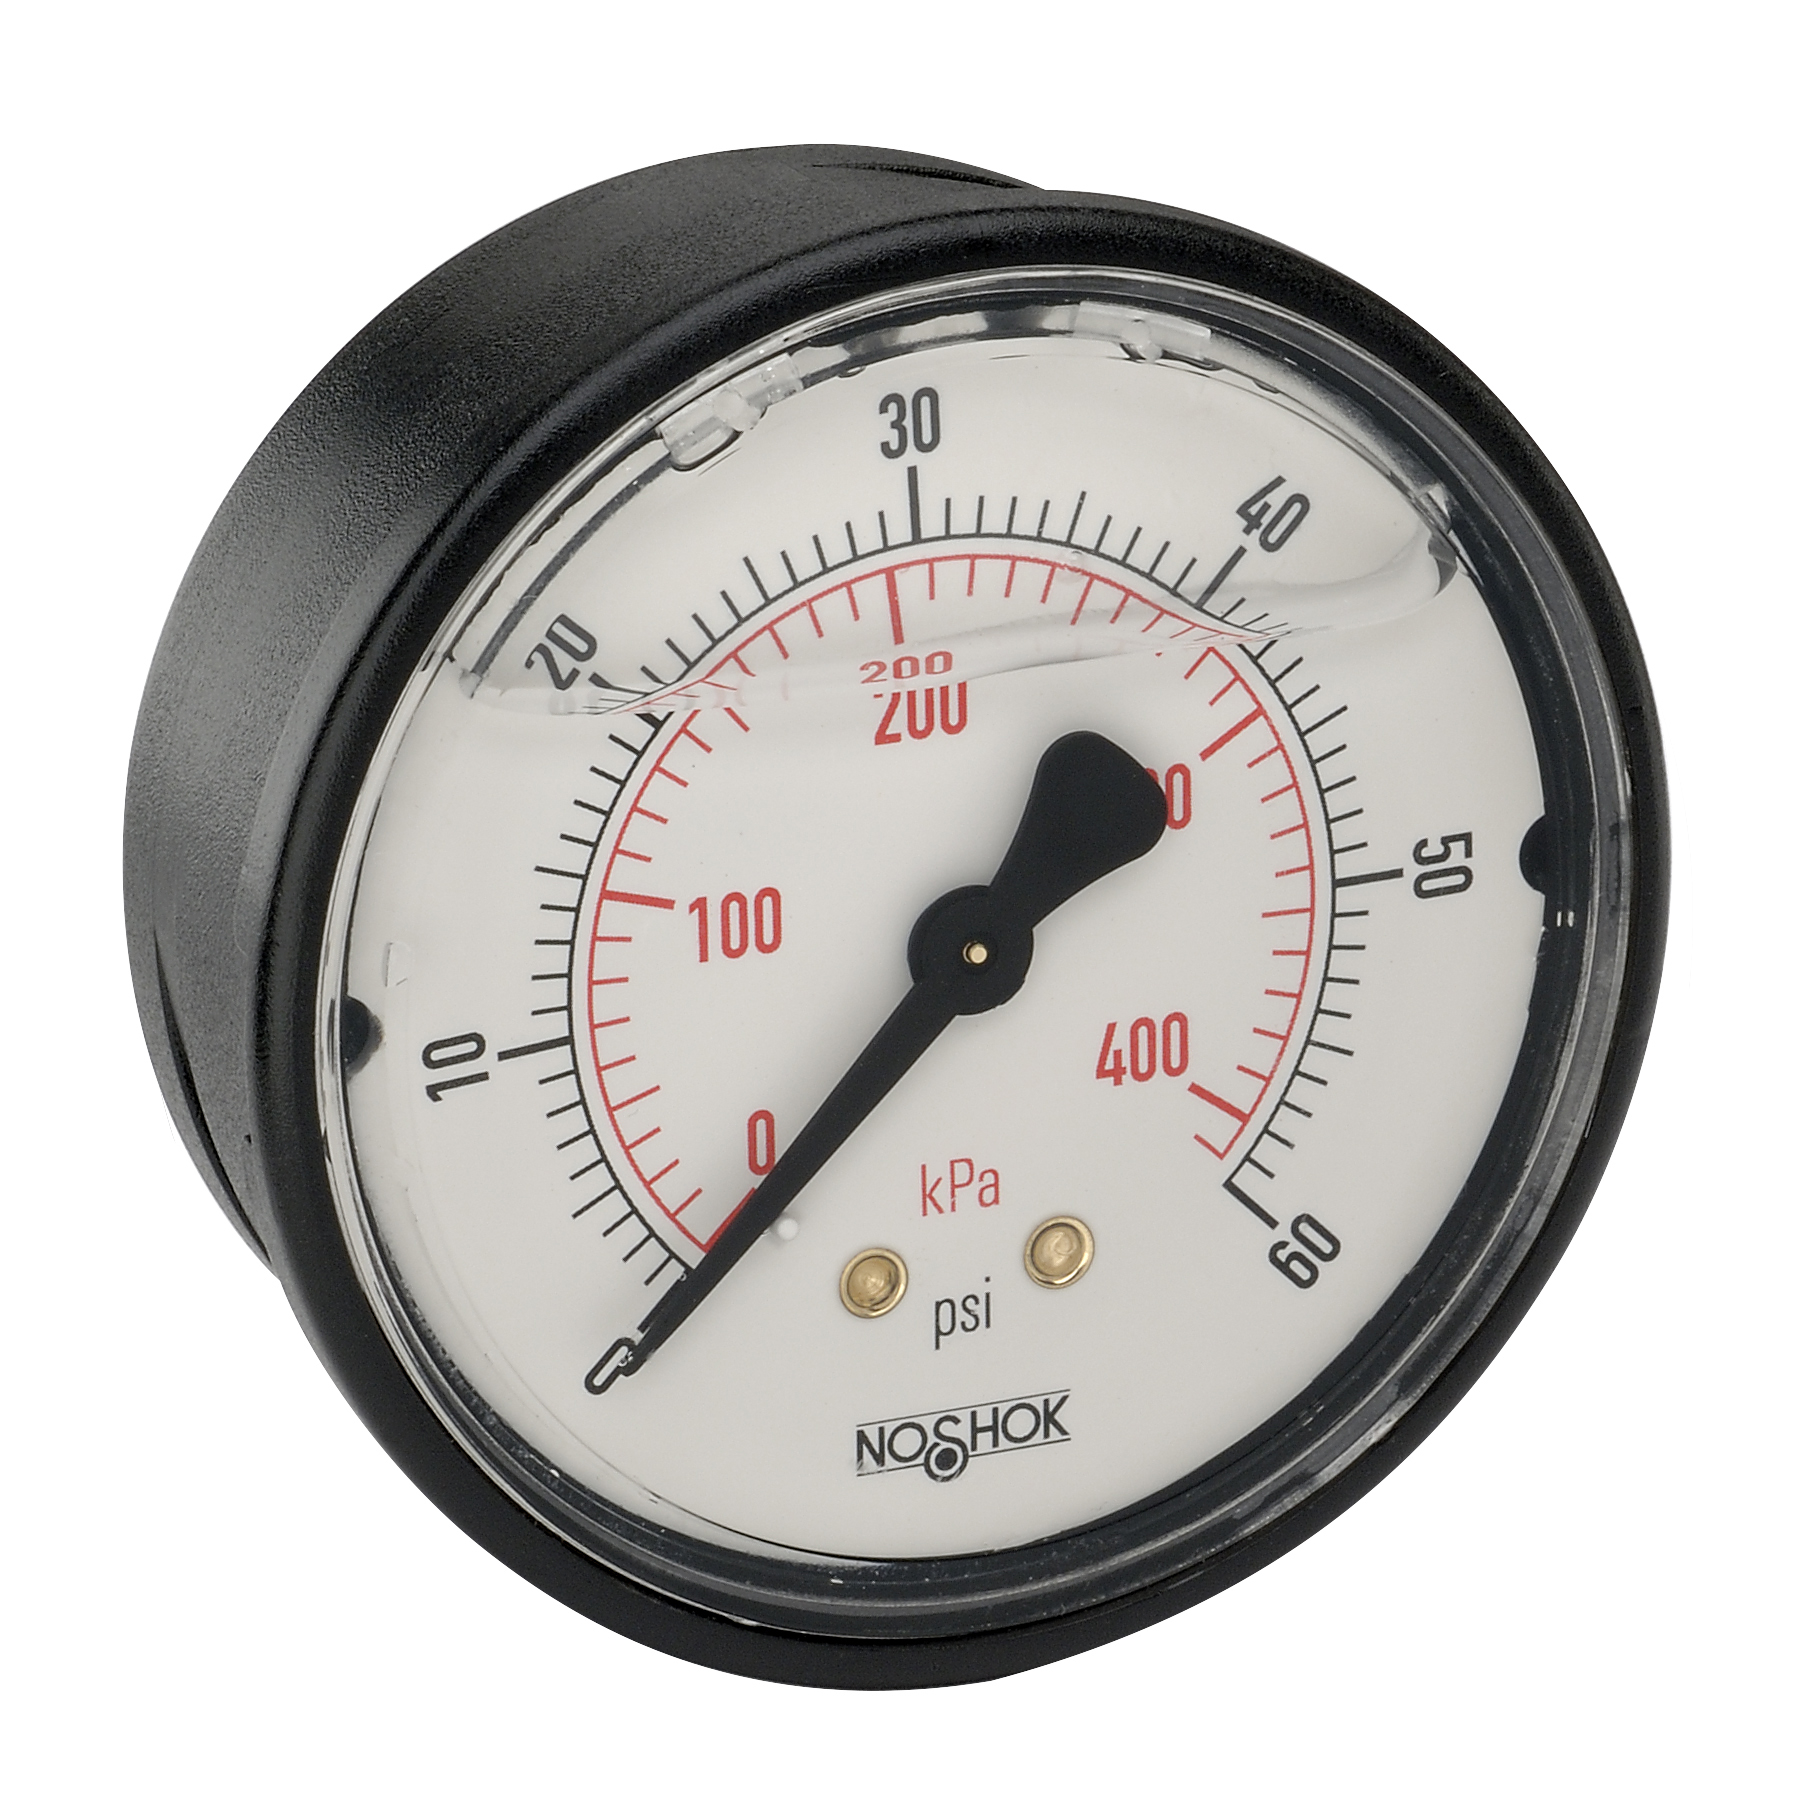 25-911-10000-psi/bar 900 Series ABS and Stainless Steel Liquid Filled Pressure Gauges